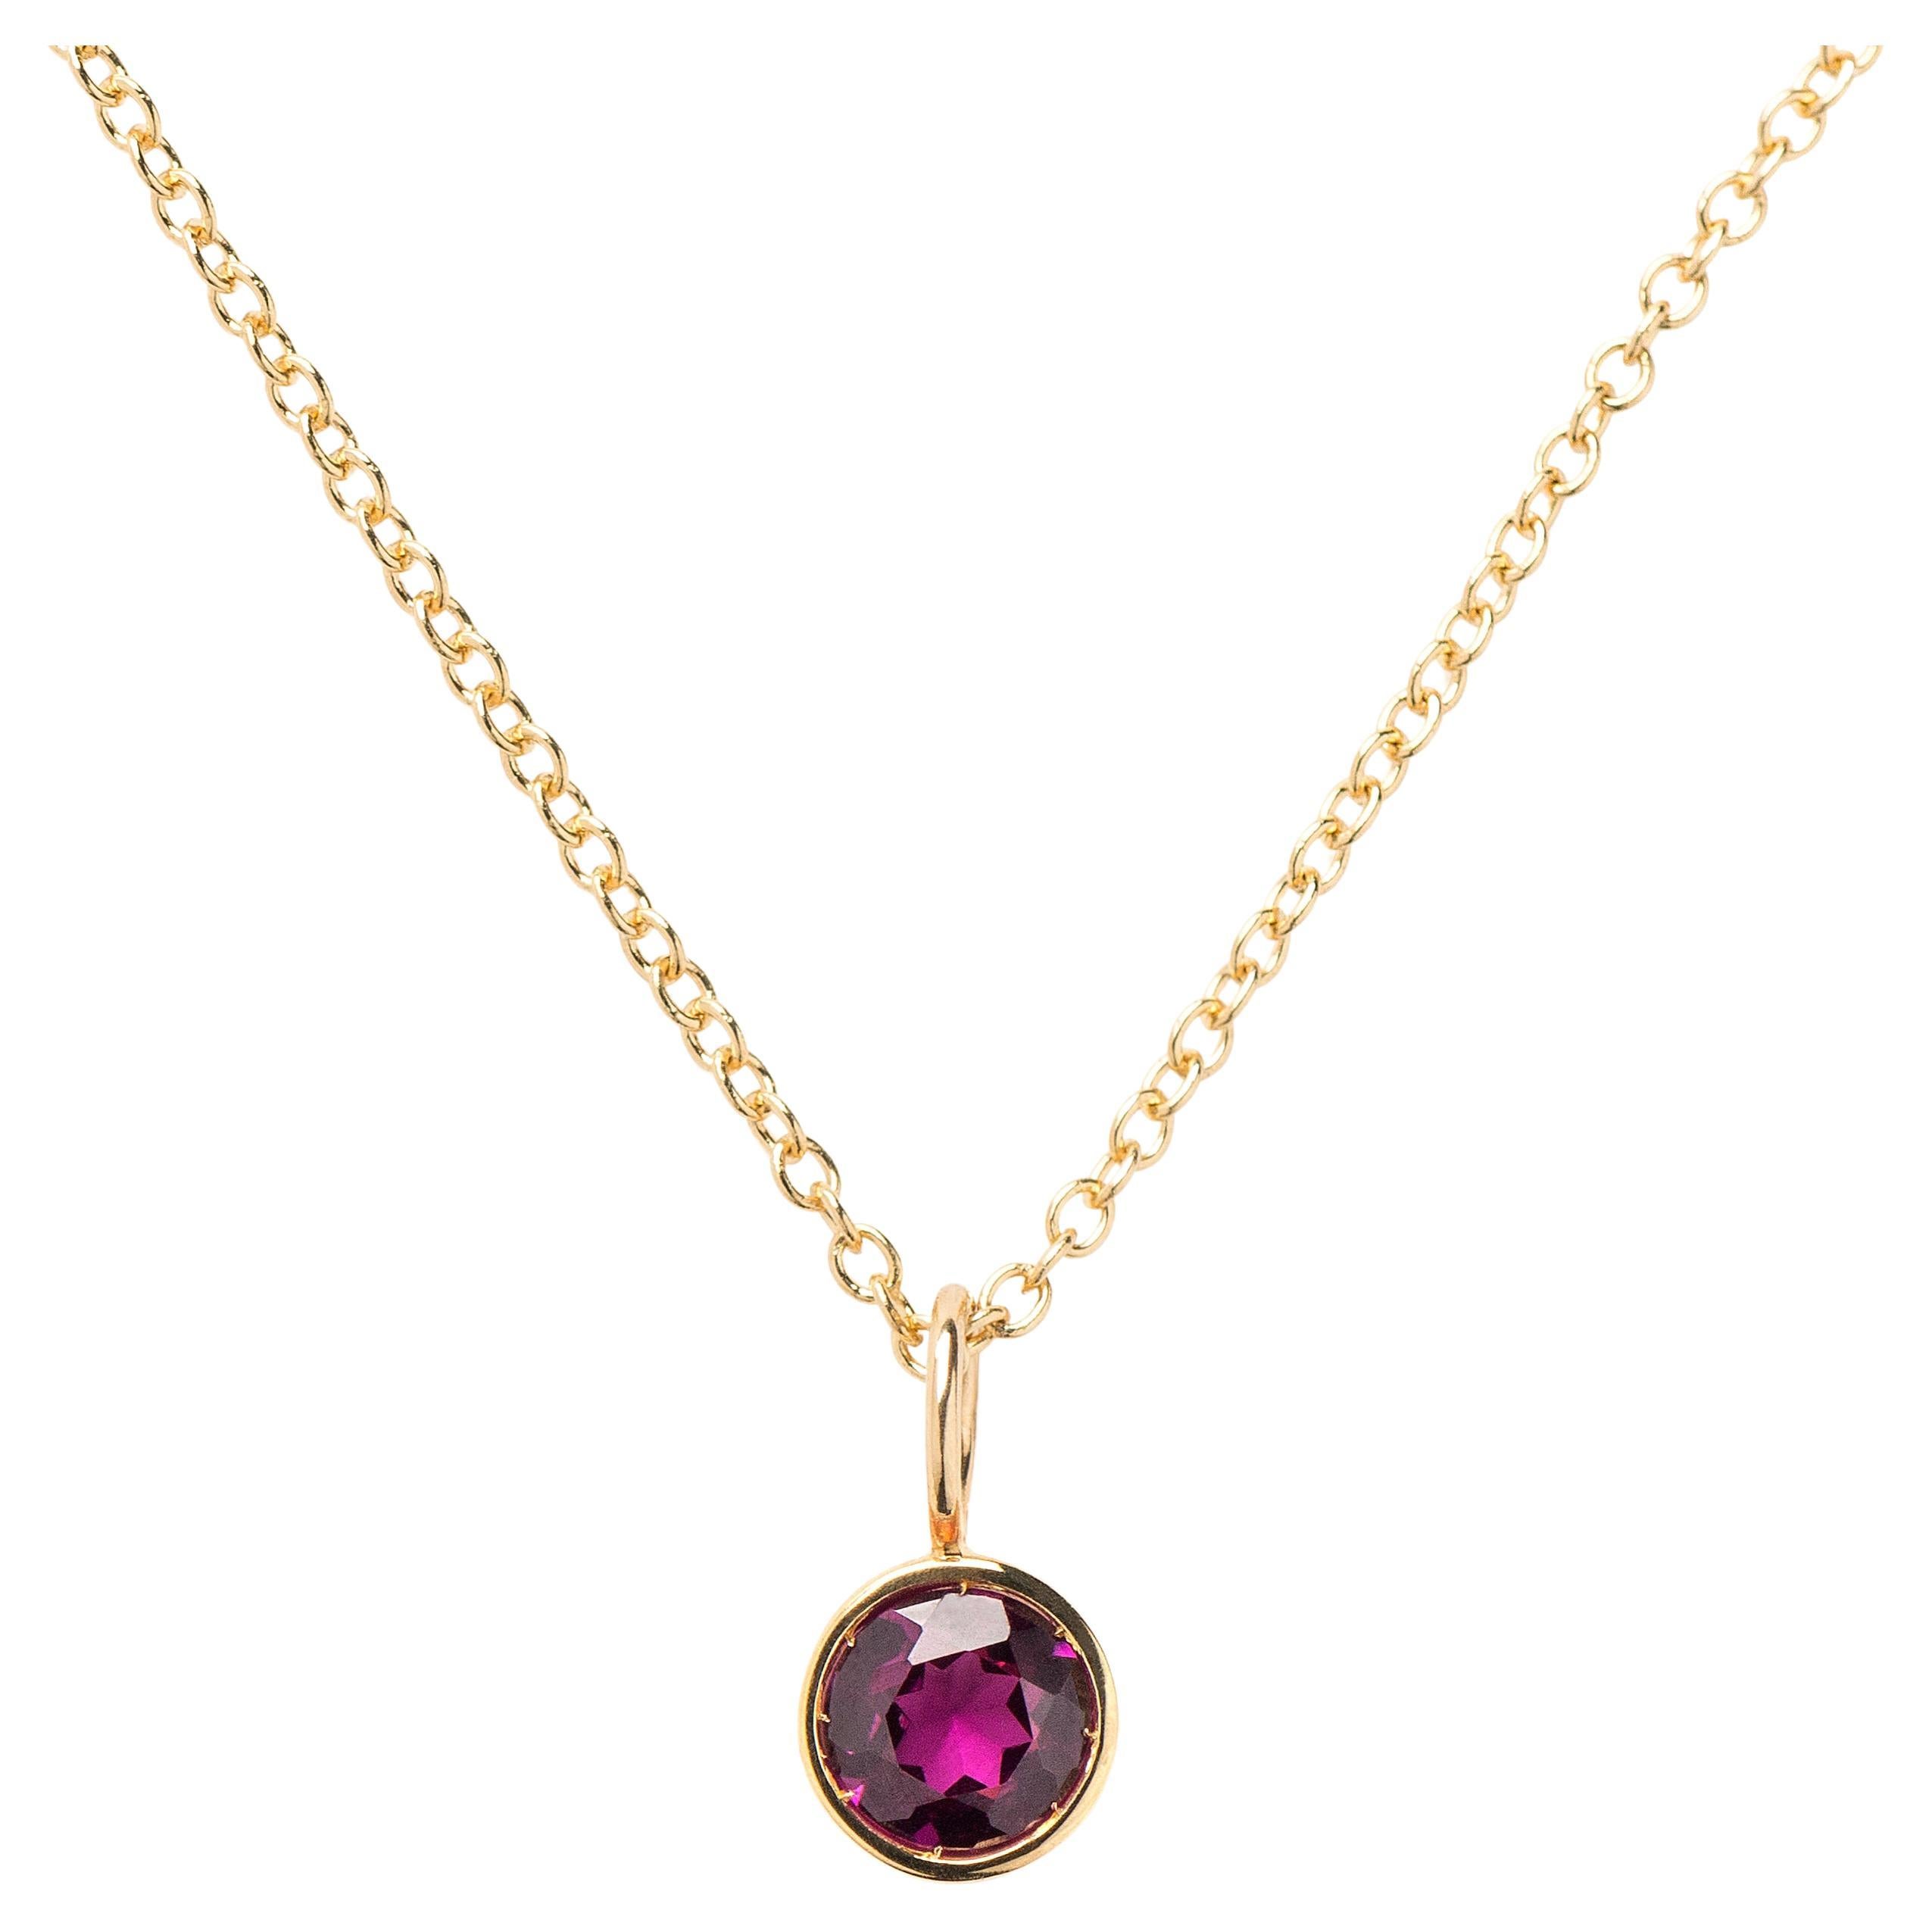 18 Carat Gold Pendant, Yellow Gold, Rhodolite, Lolita Collection For Sale